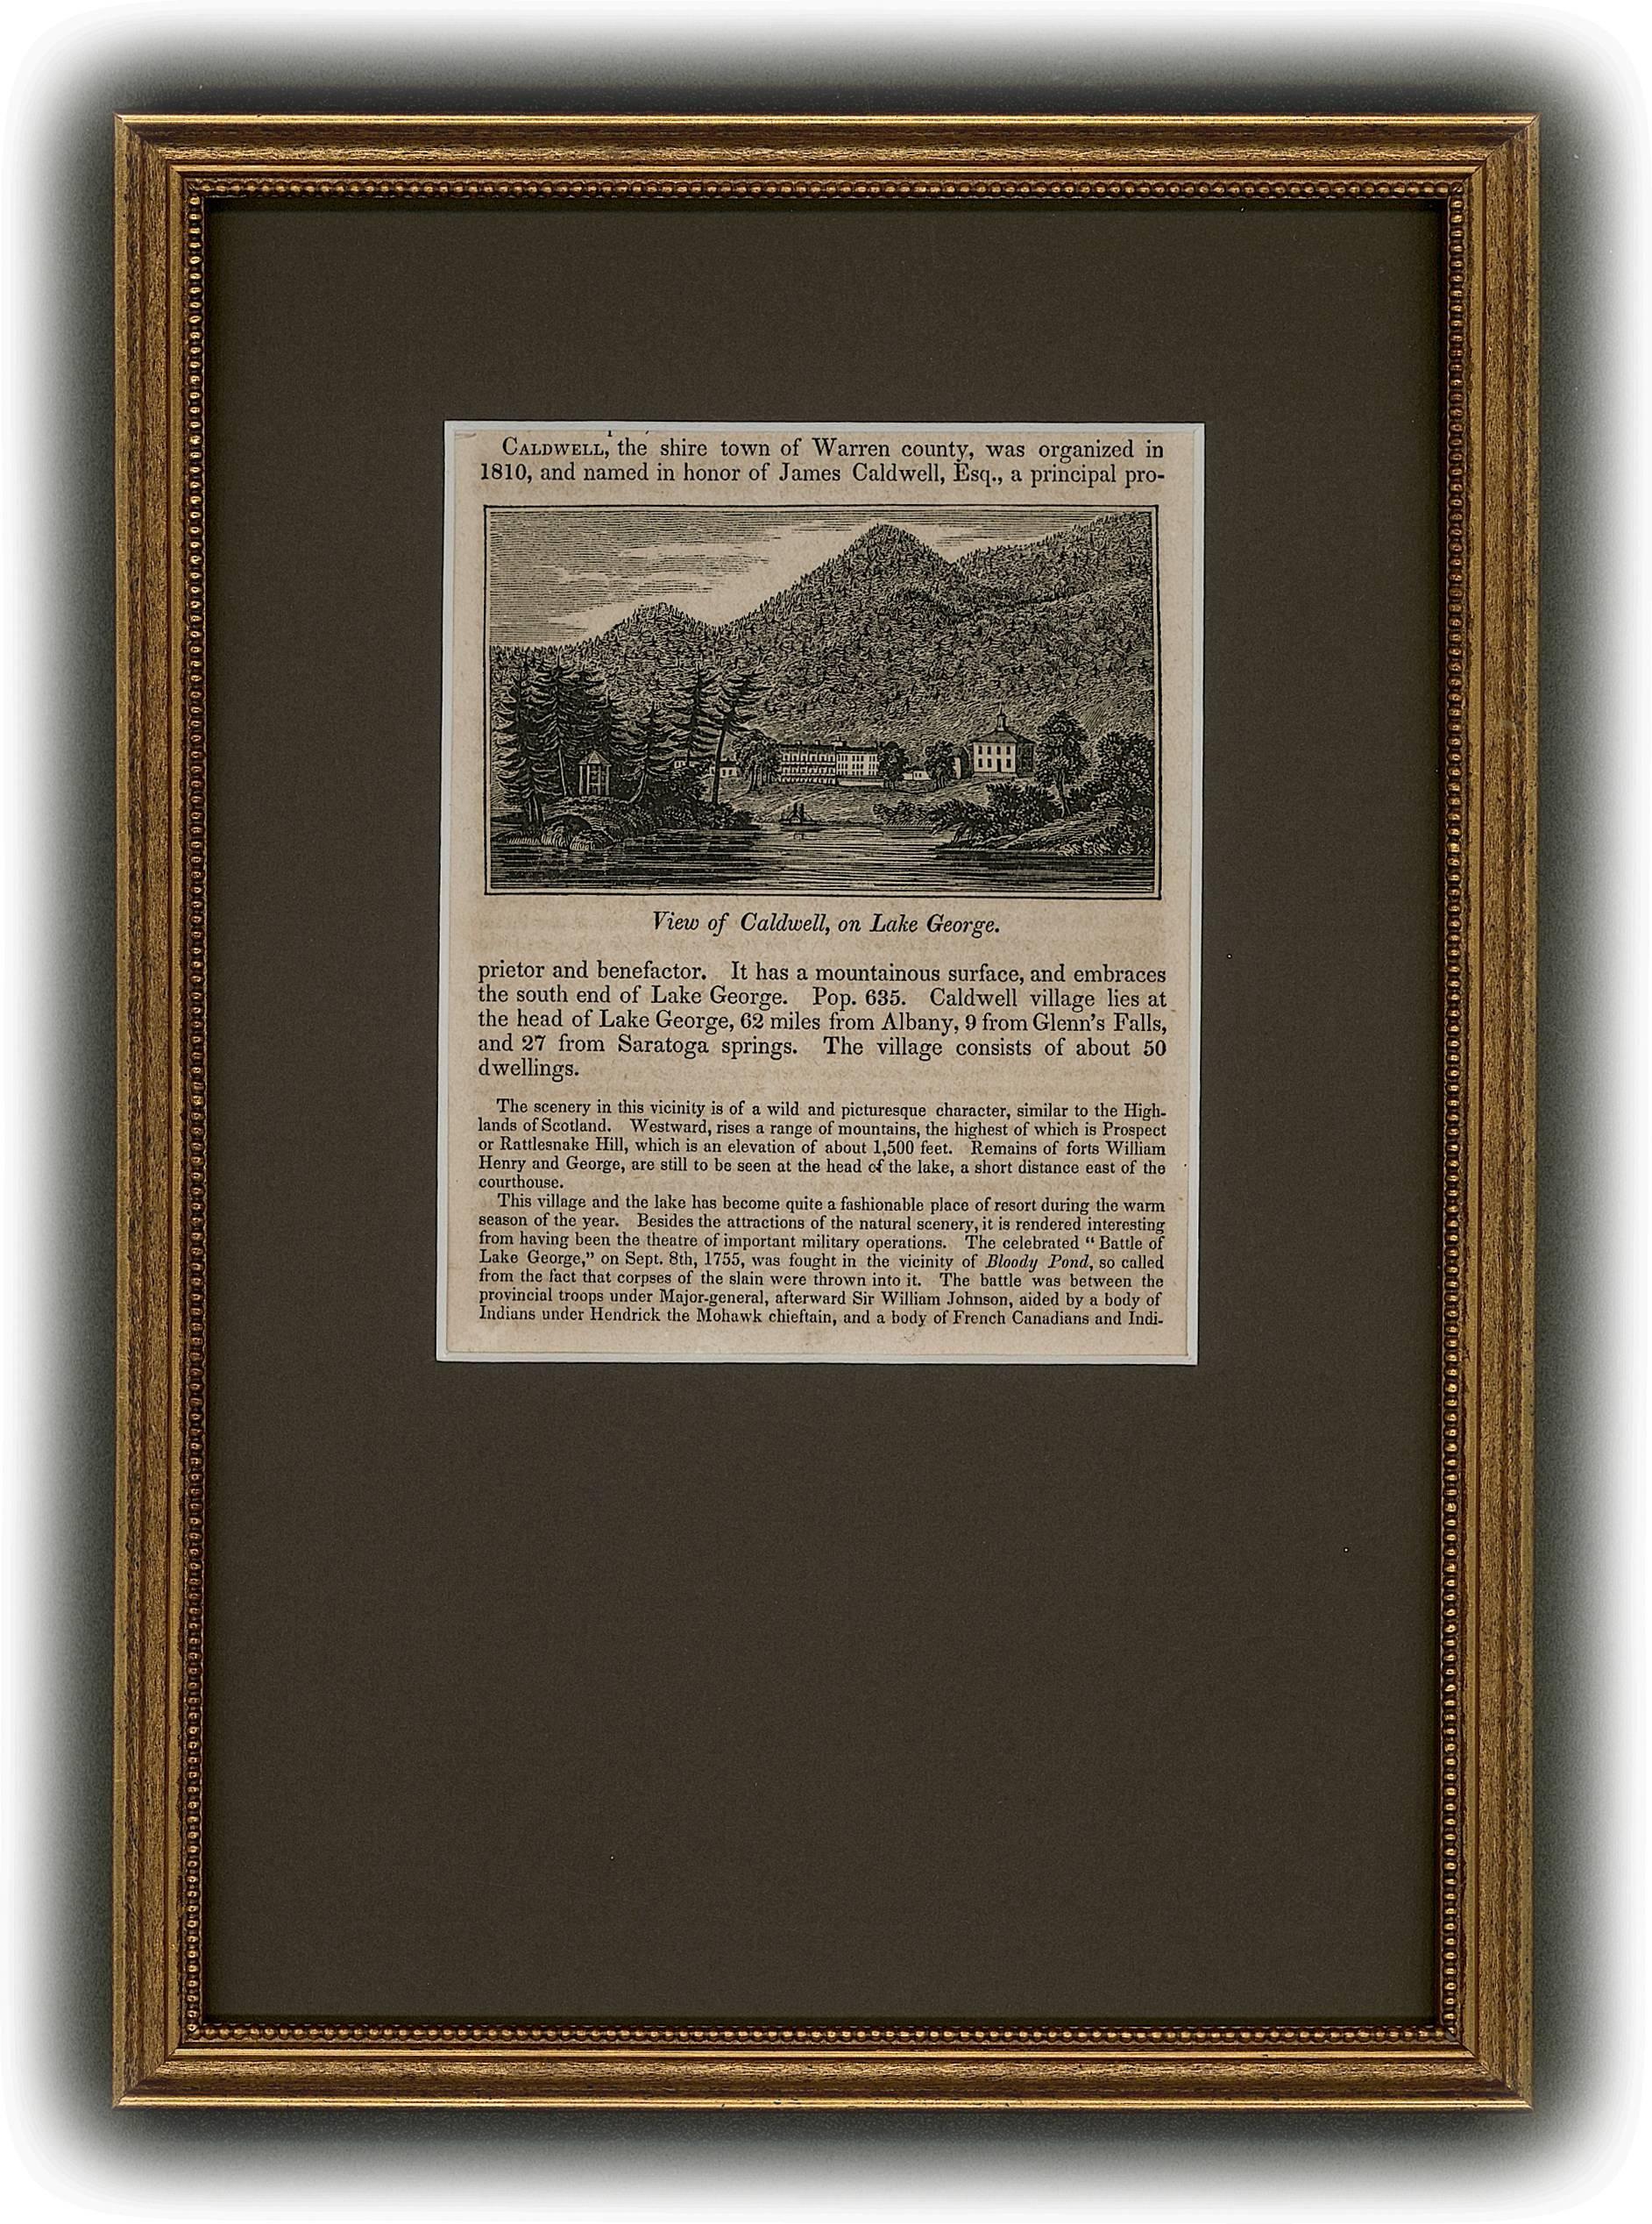 Unknown Landscape Print - View of Caldwell, on Lake George